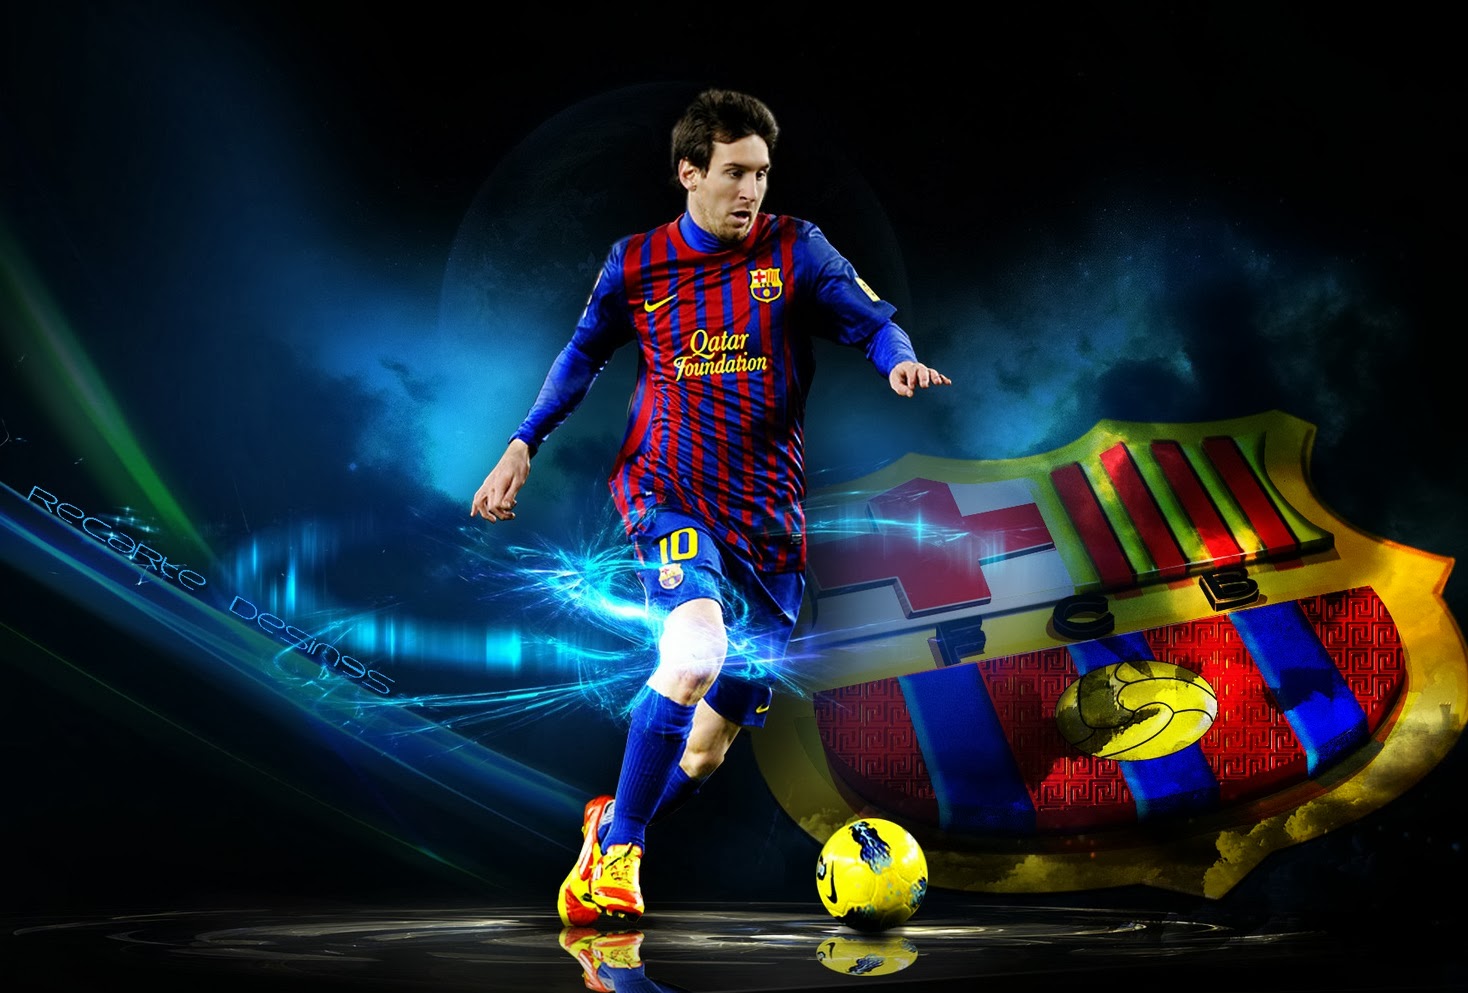 ... Messi Barcelona New HD Wallpapers 2013-2014 | Football HD Wallpapers